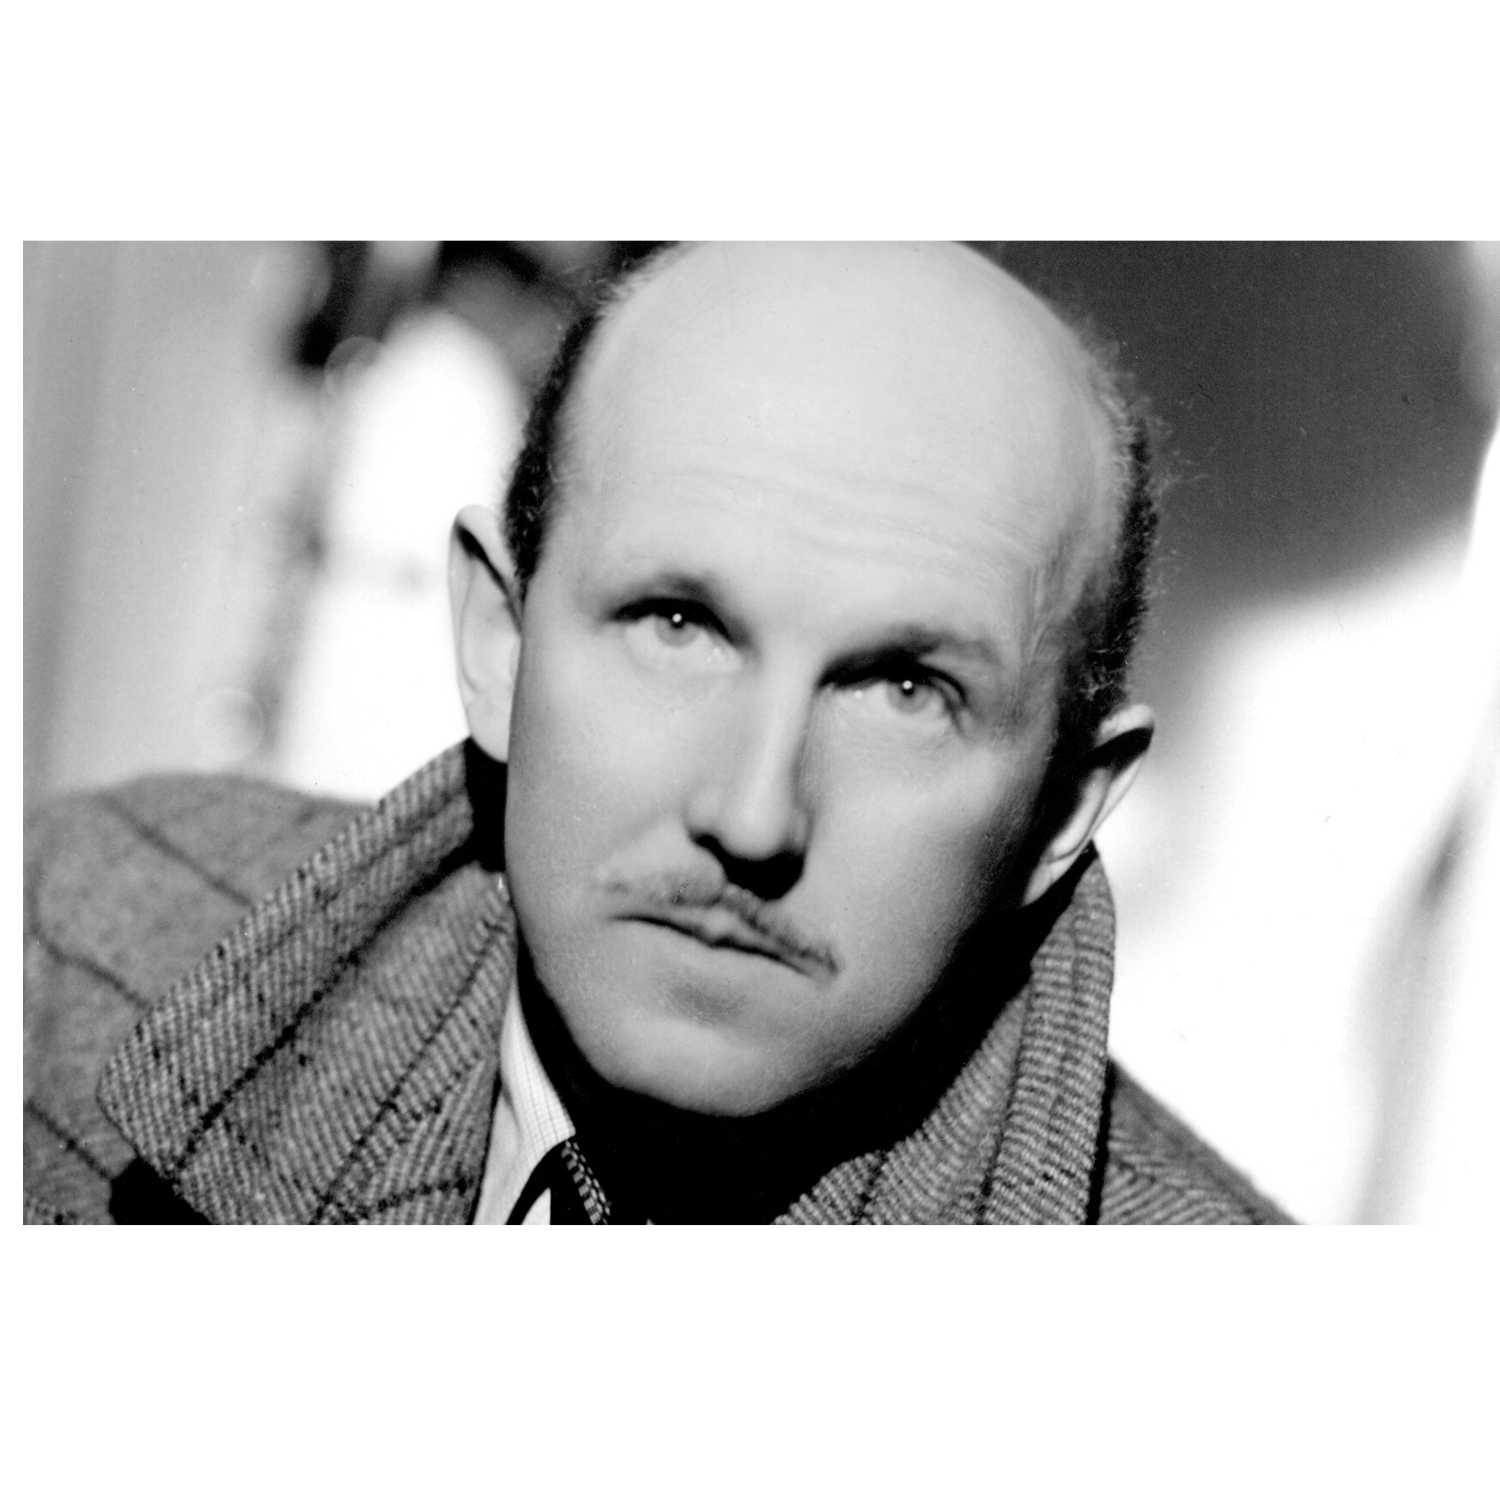 Michael Powell: "Art is all that matters"